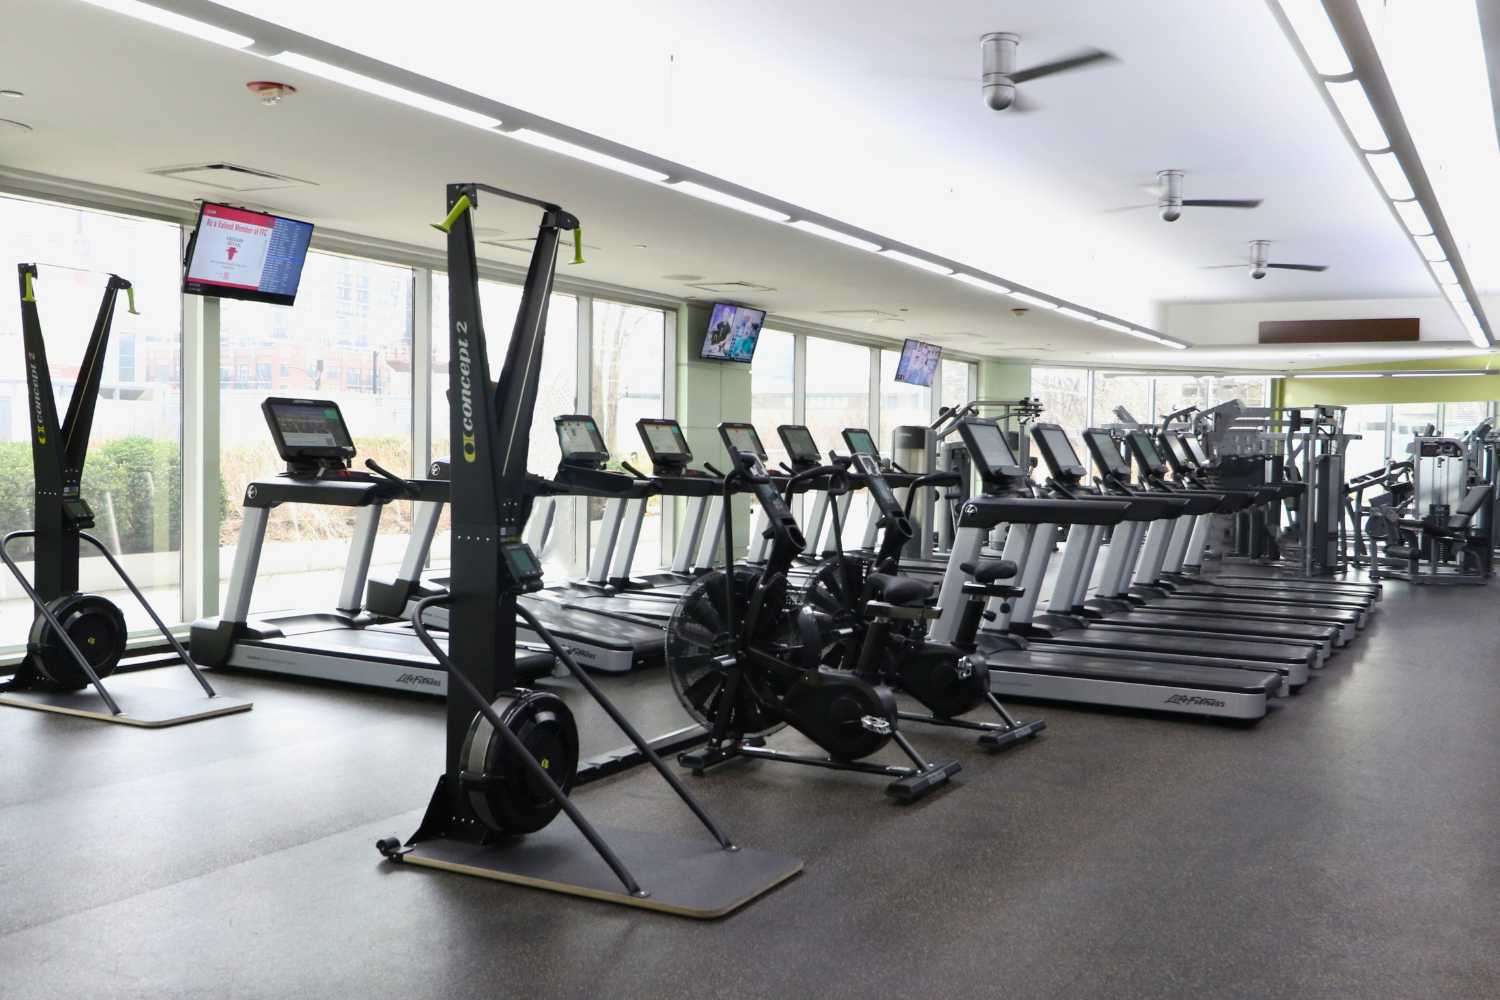 view of the cardio equipment area